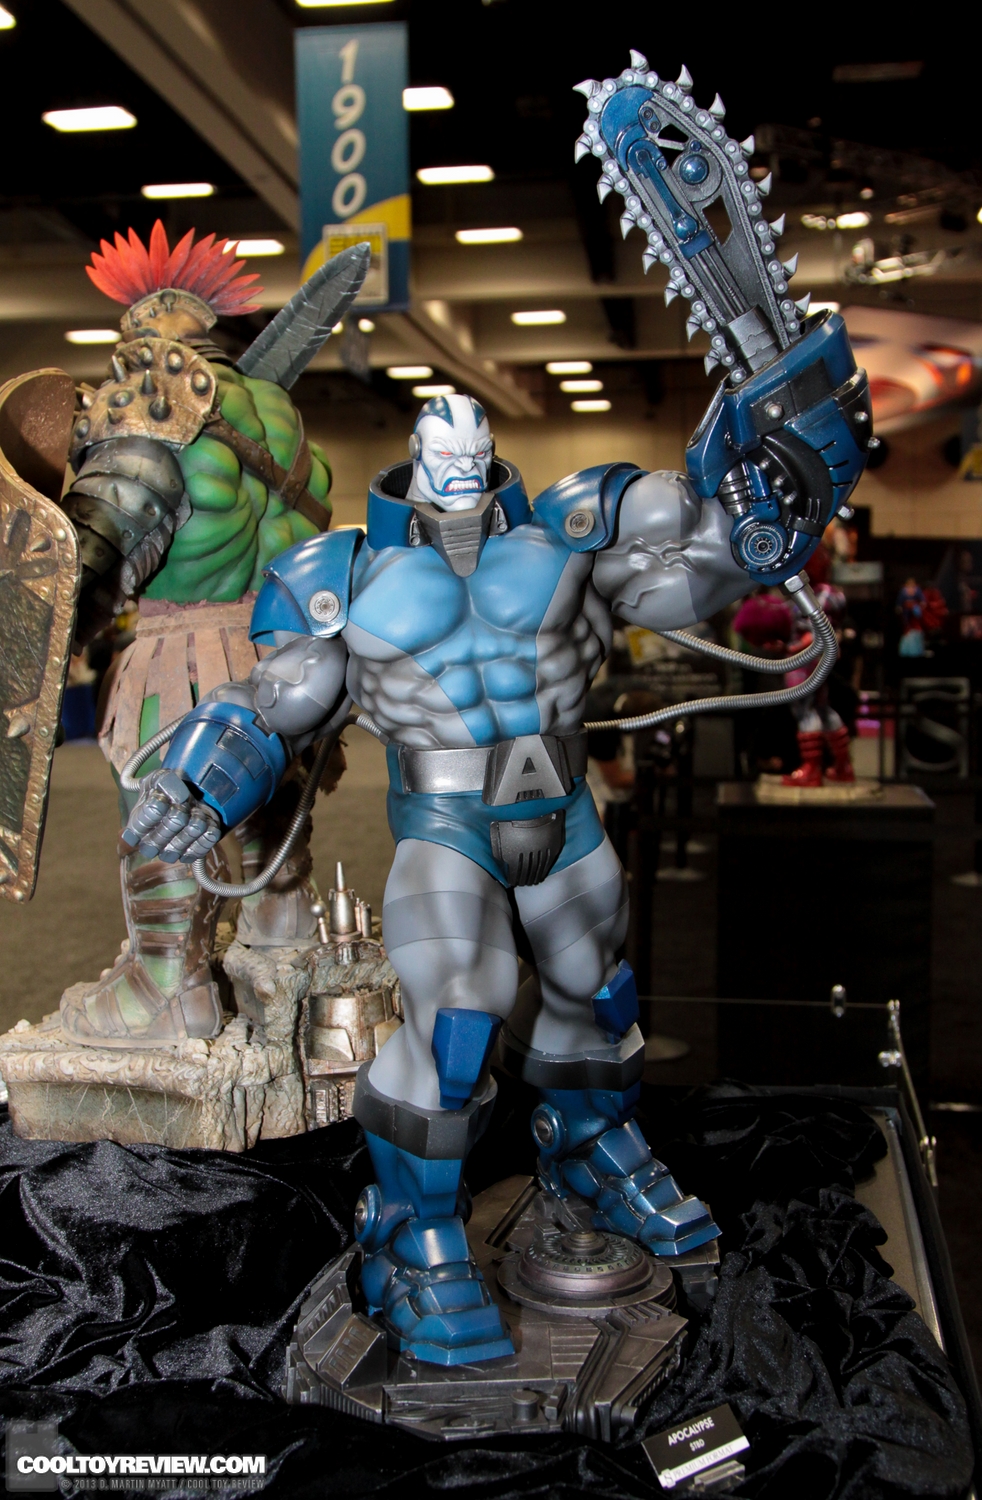 SDCC_2013_Sideshow_Collectibles_Thursday-123.jpg